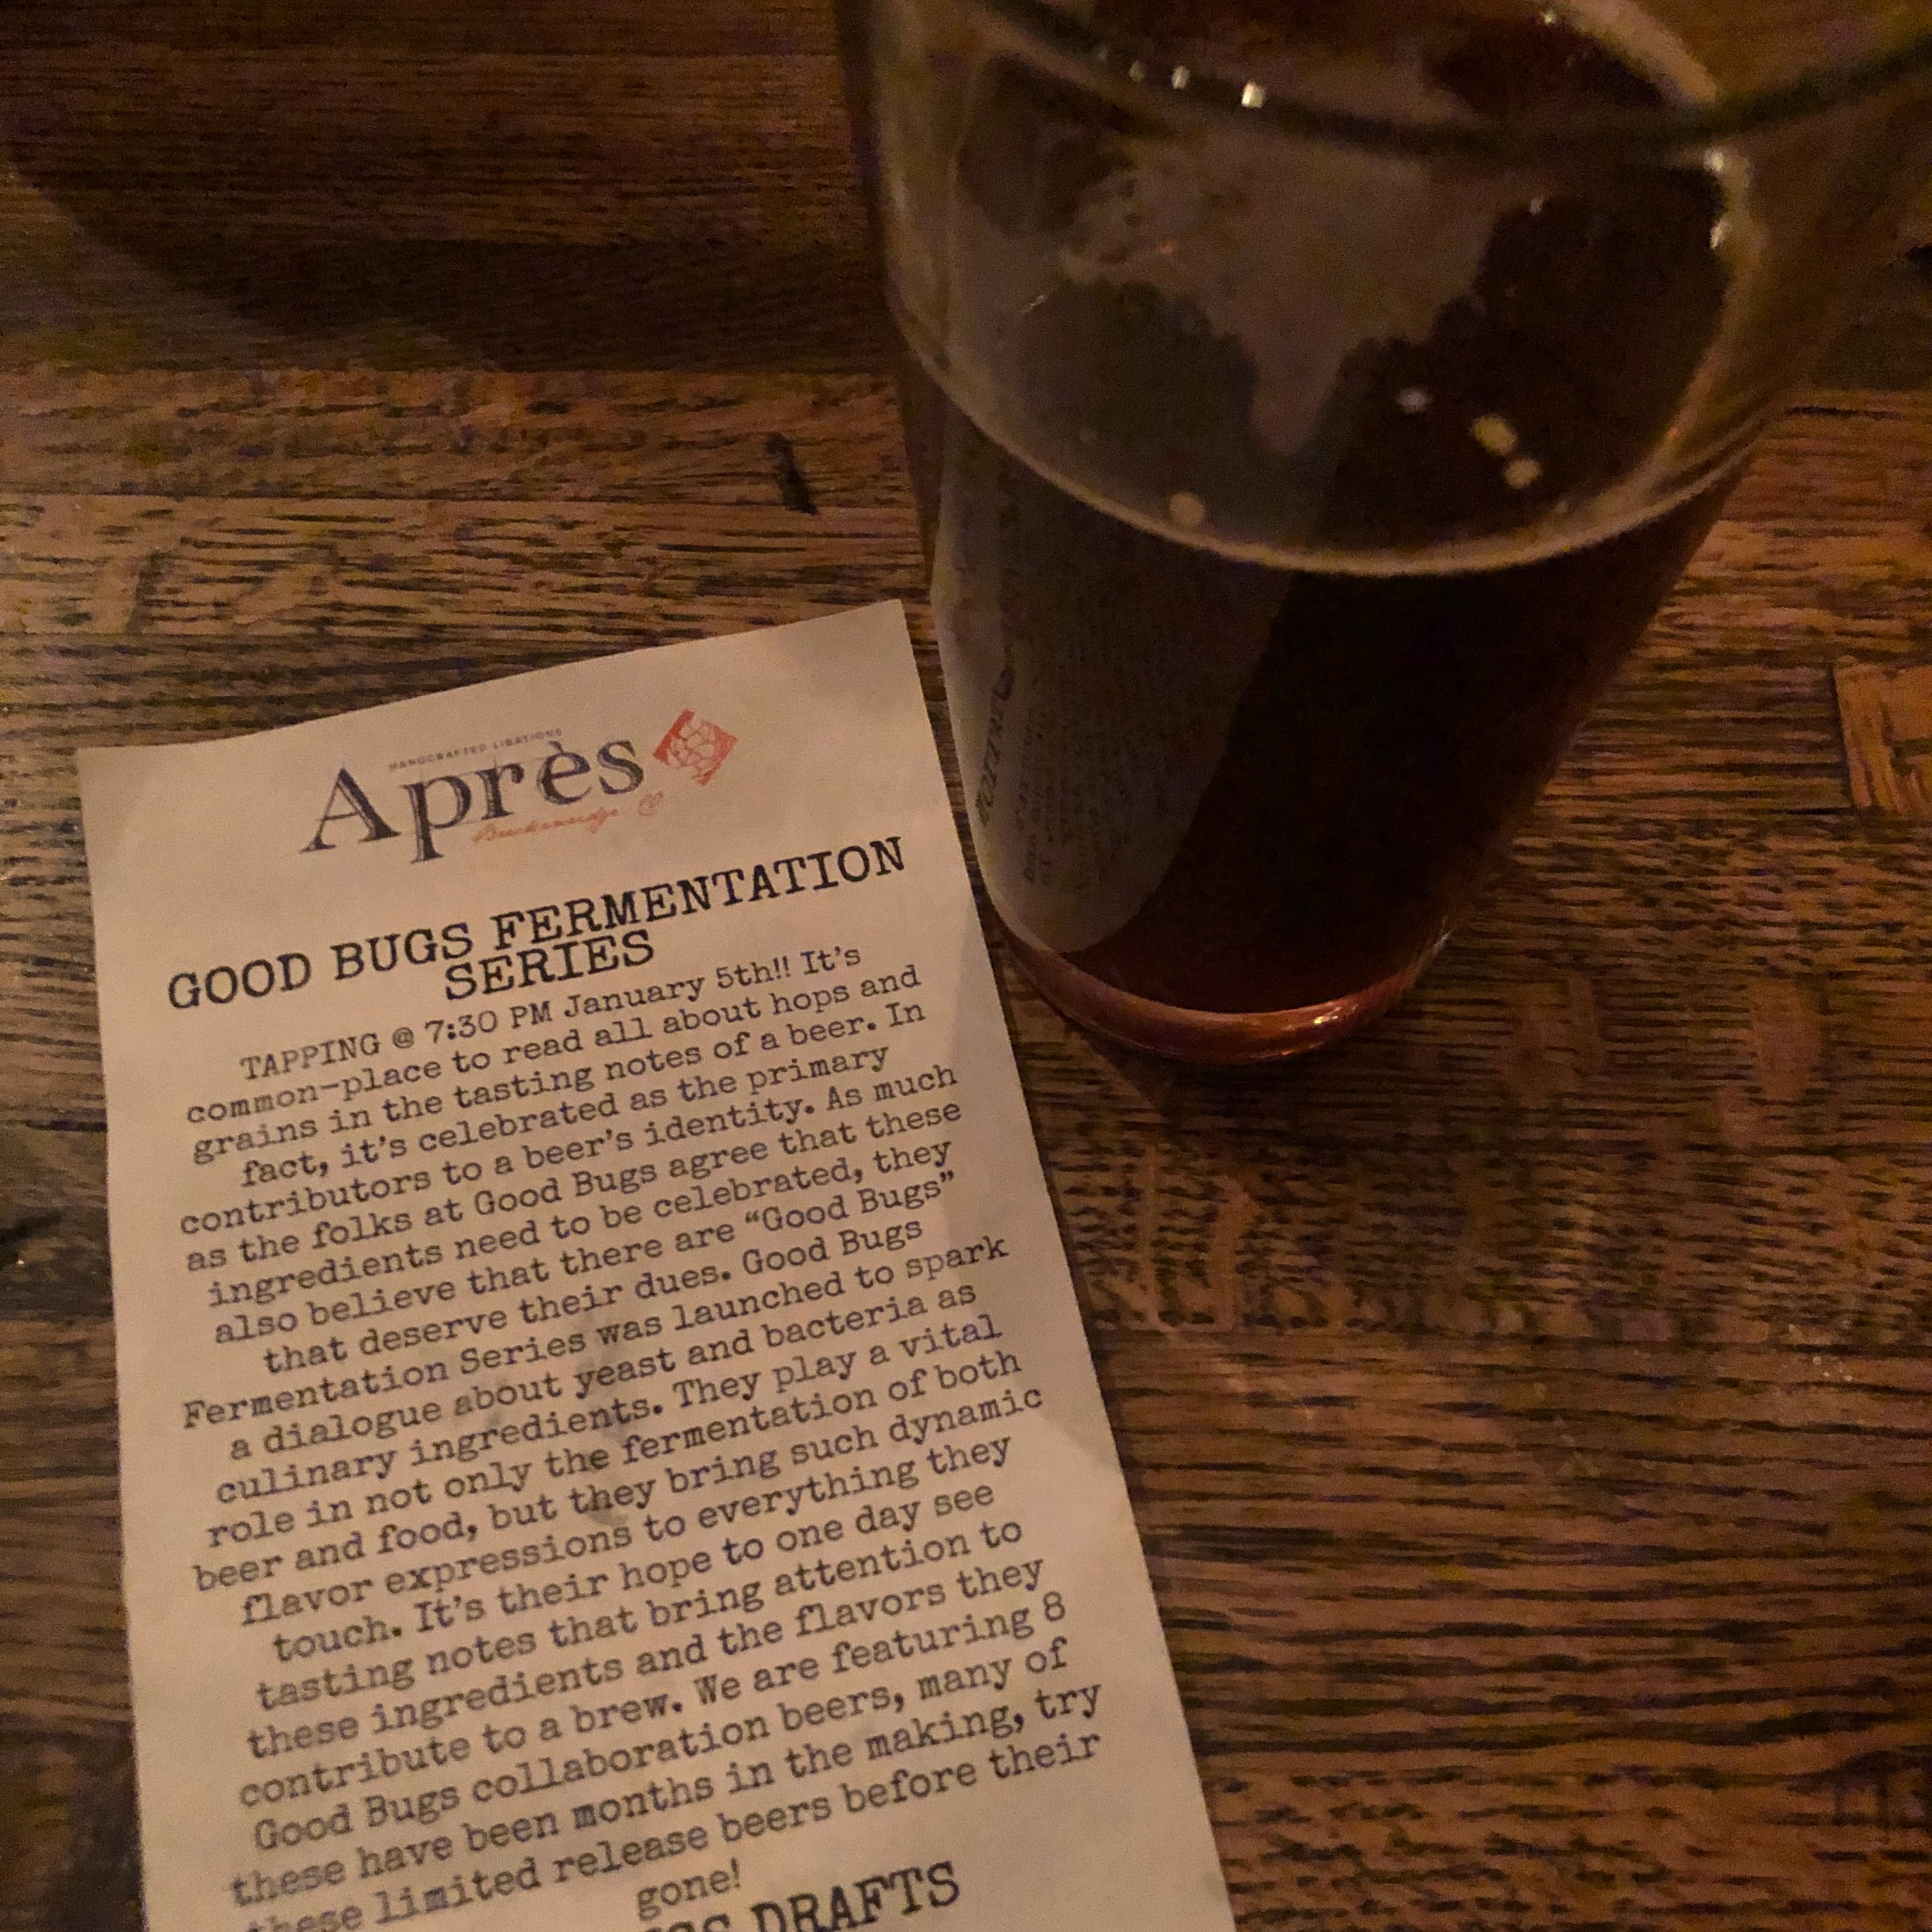 Good Bugs Fermentation Series event at Apres in downtown Breckenridge that took place while the 2018 Big Beers, Belgians & Barleywines Festival was in town.